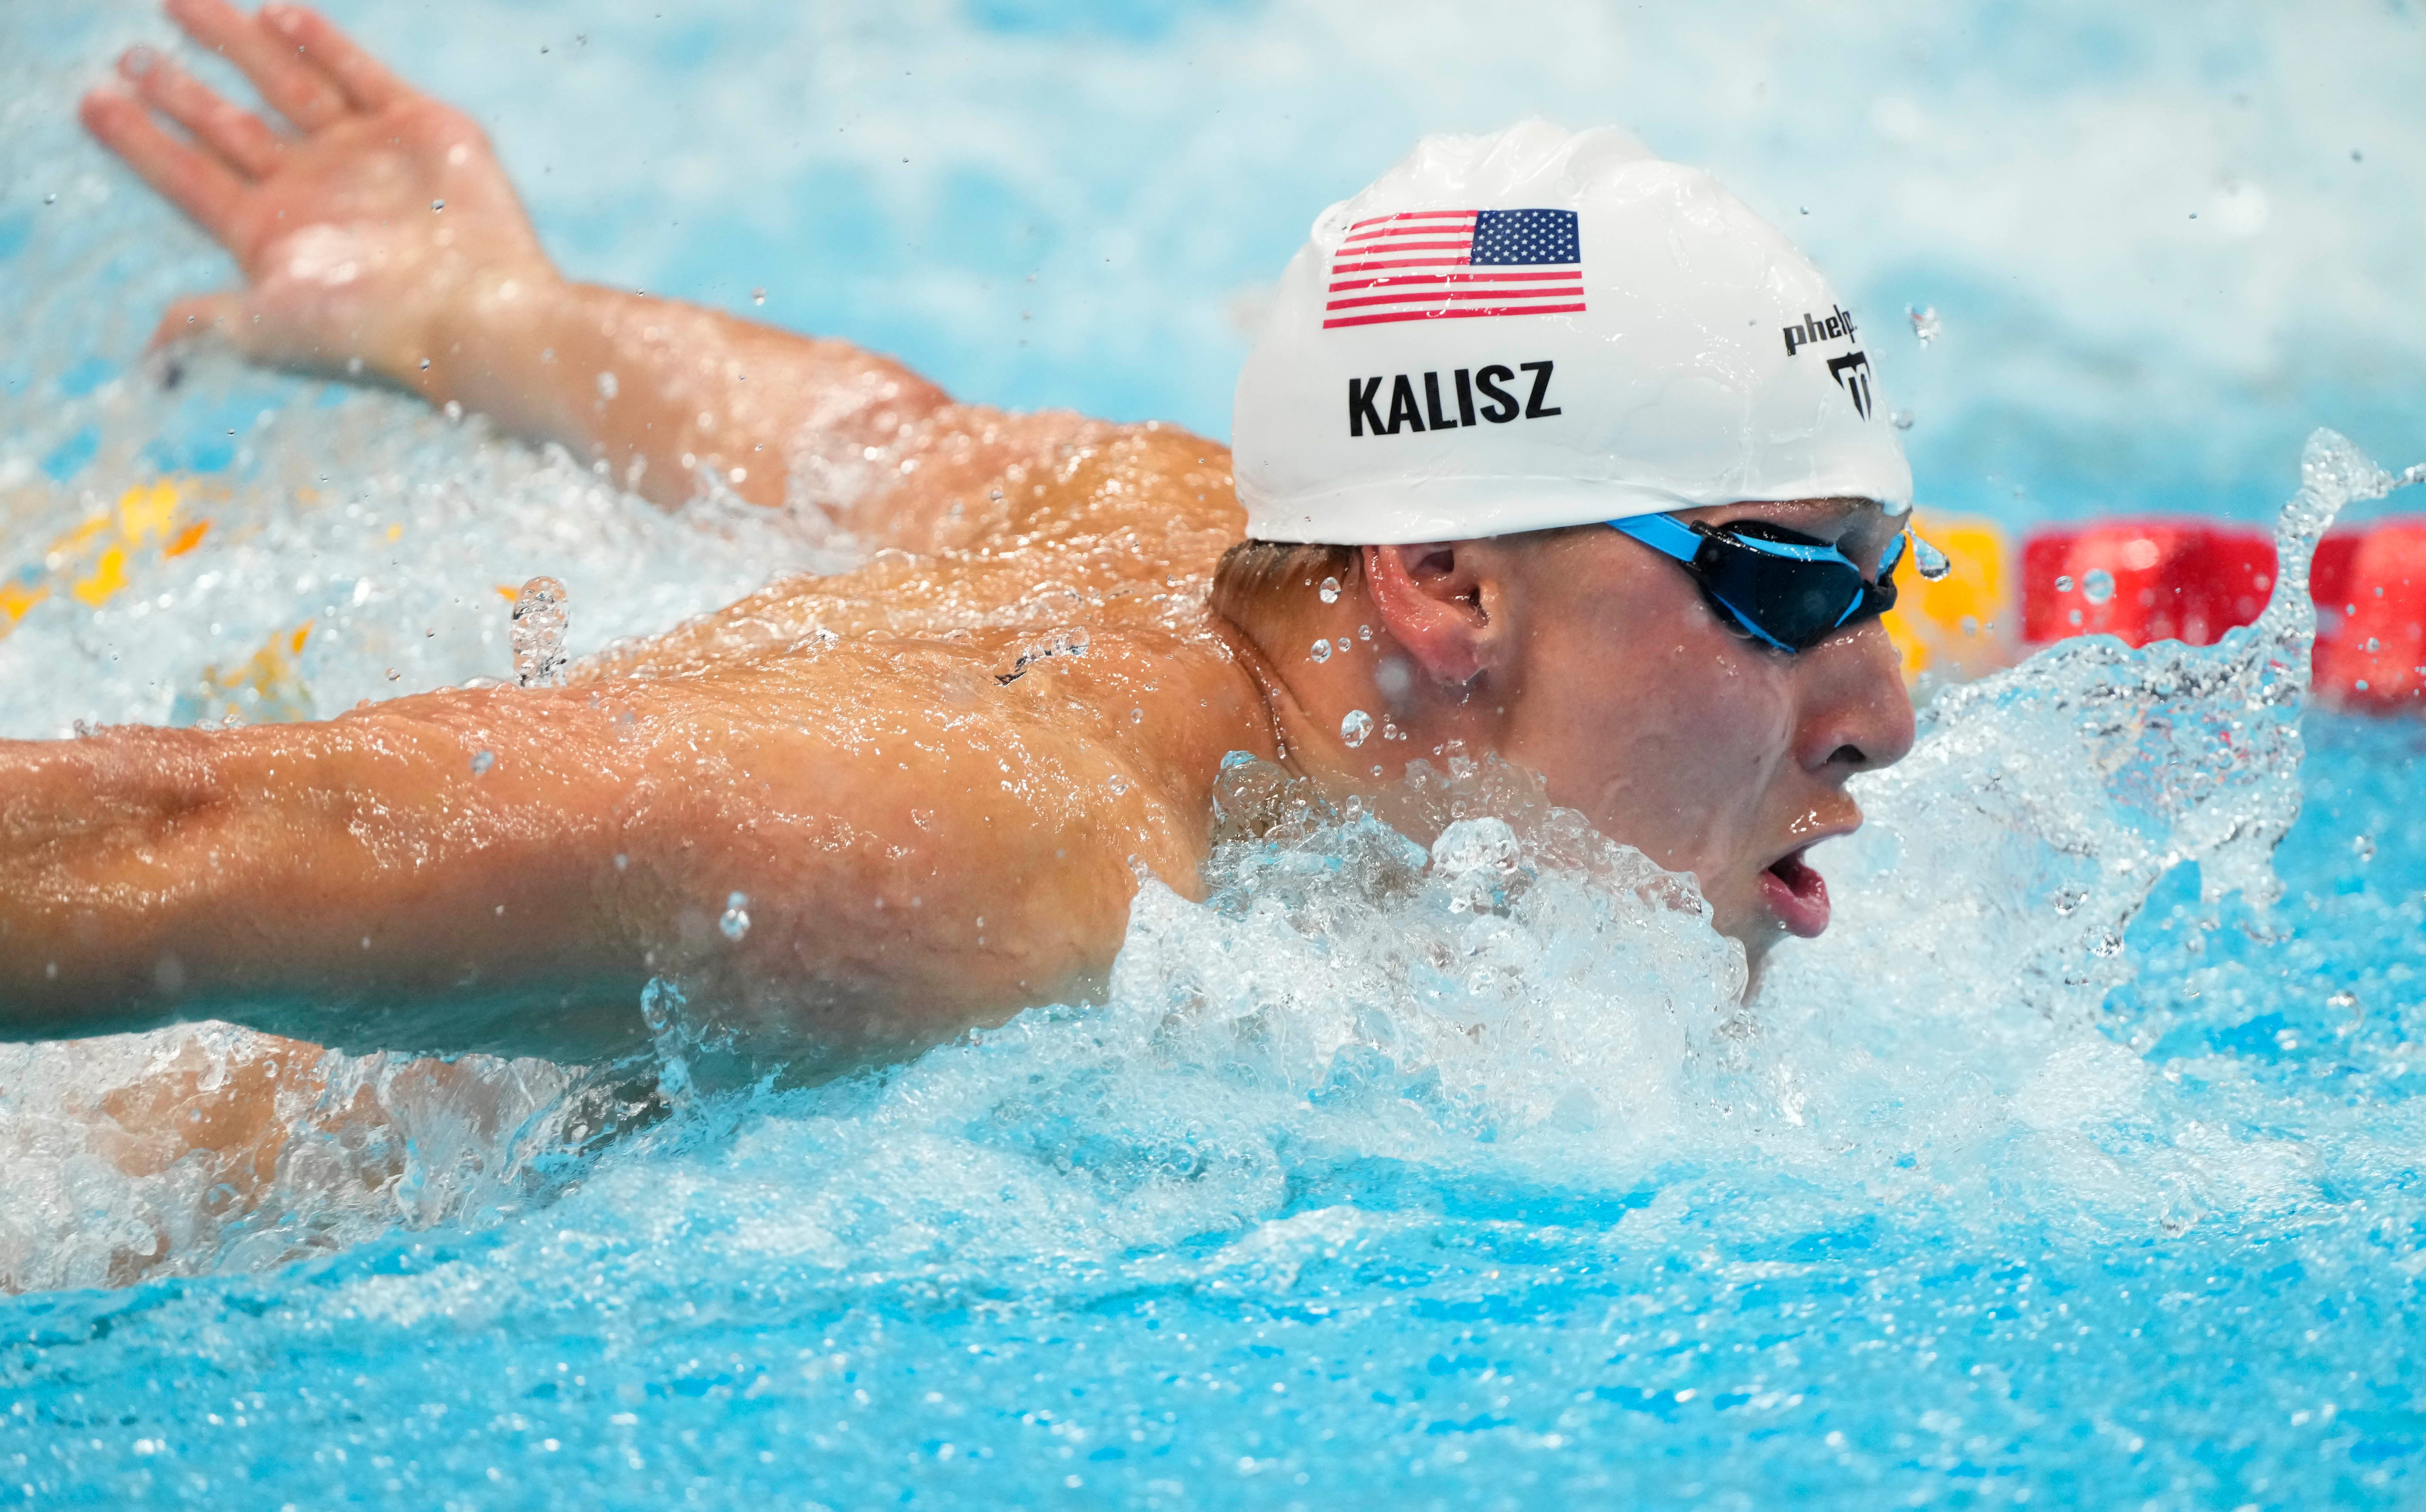 Olympic swimmers agree: 400 IM is a 'beast,' physically and mentally